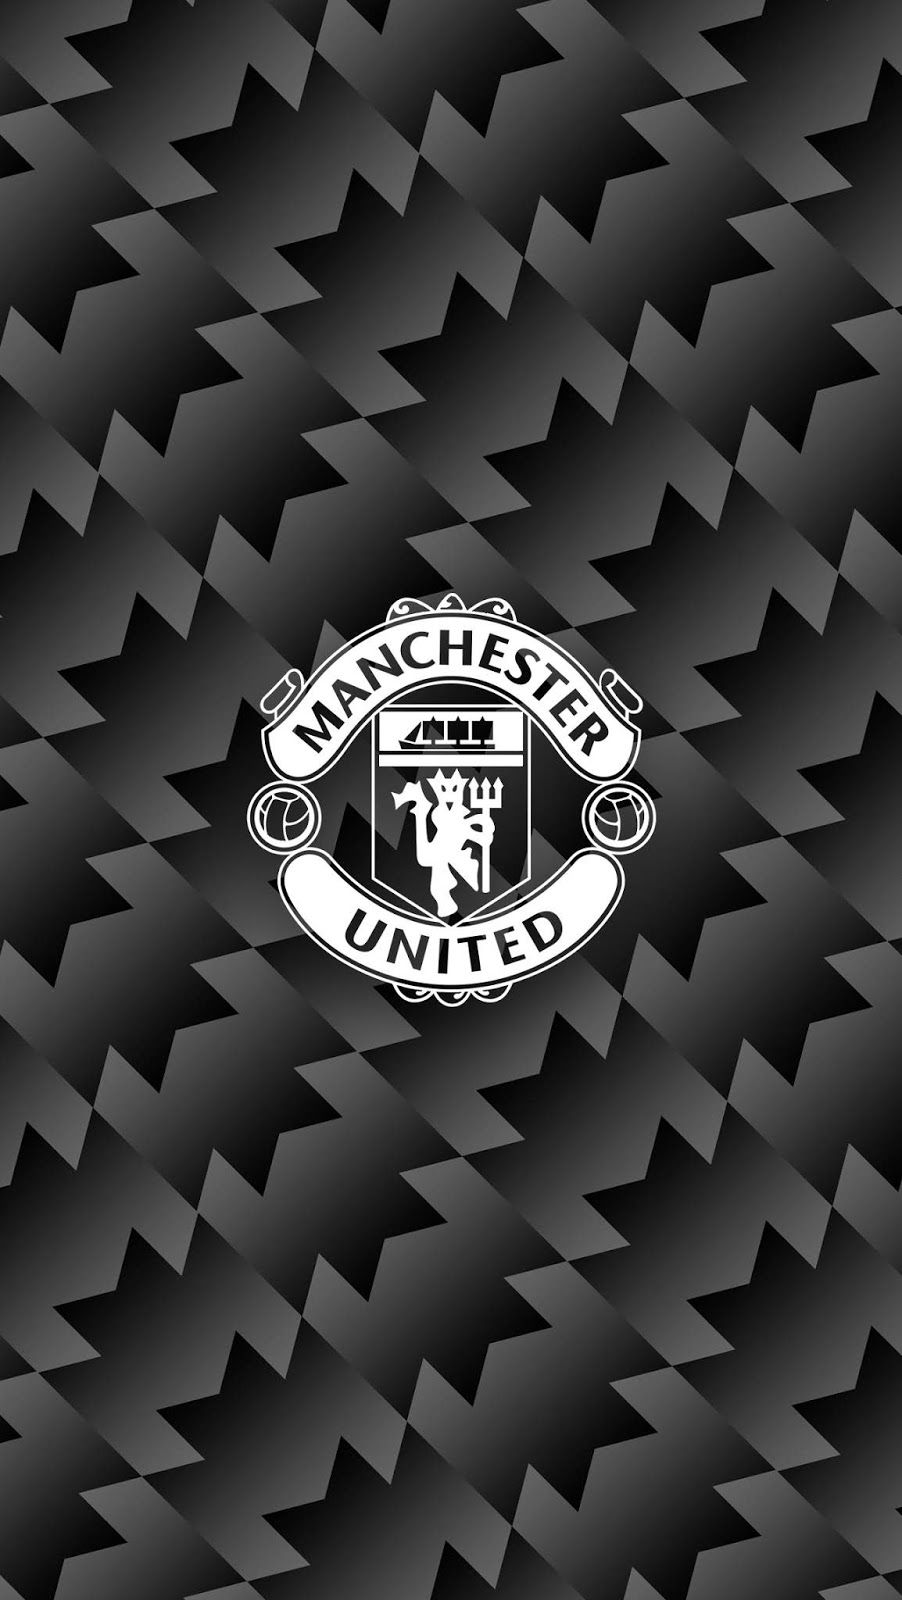 manchester united iphone wallpaper HD. Manchester united wallpaper iphone, Manchester united wallpaper, Manchester united art